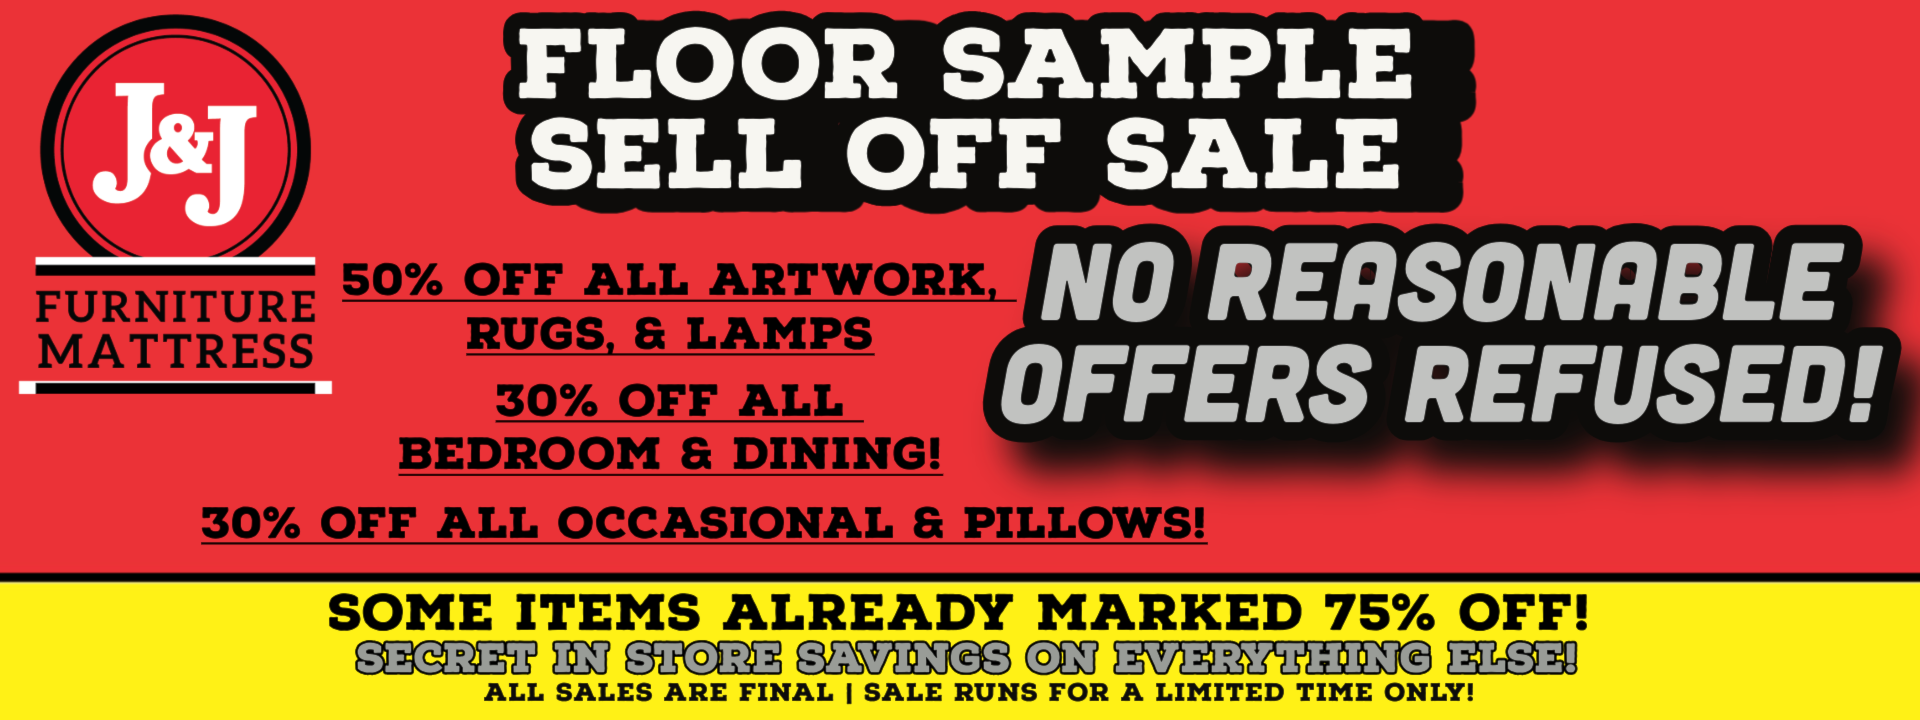 everything must go floor sample sell off sale going out of business furniture stores